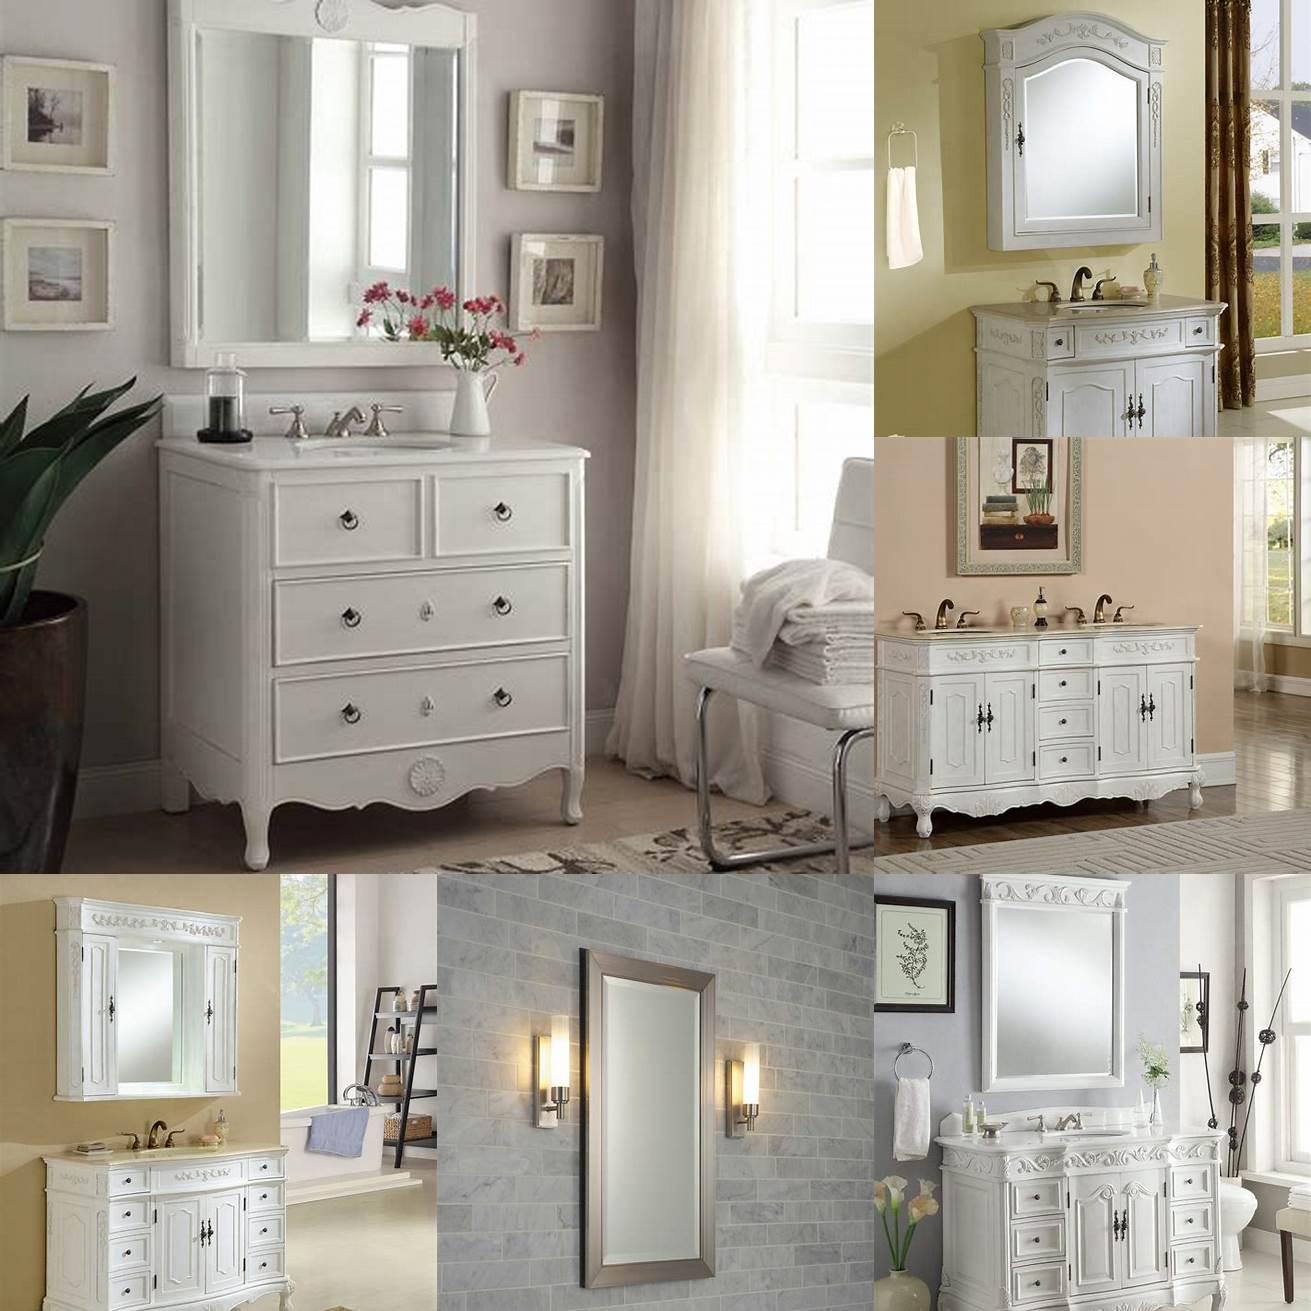 An antique white bathroom vanity with a mirror and sconces can create a stunning focal point in your bathroom